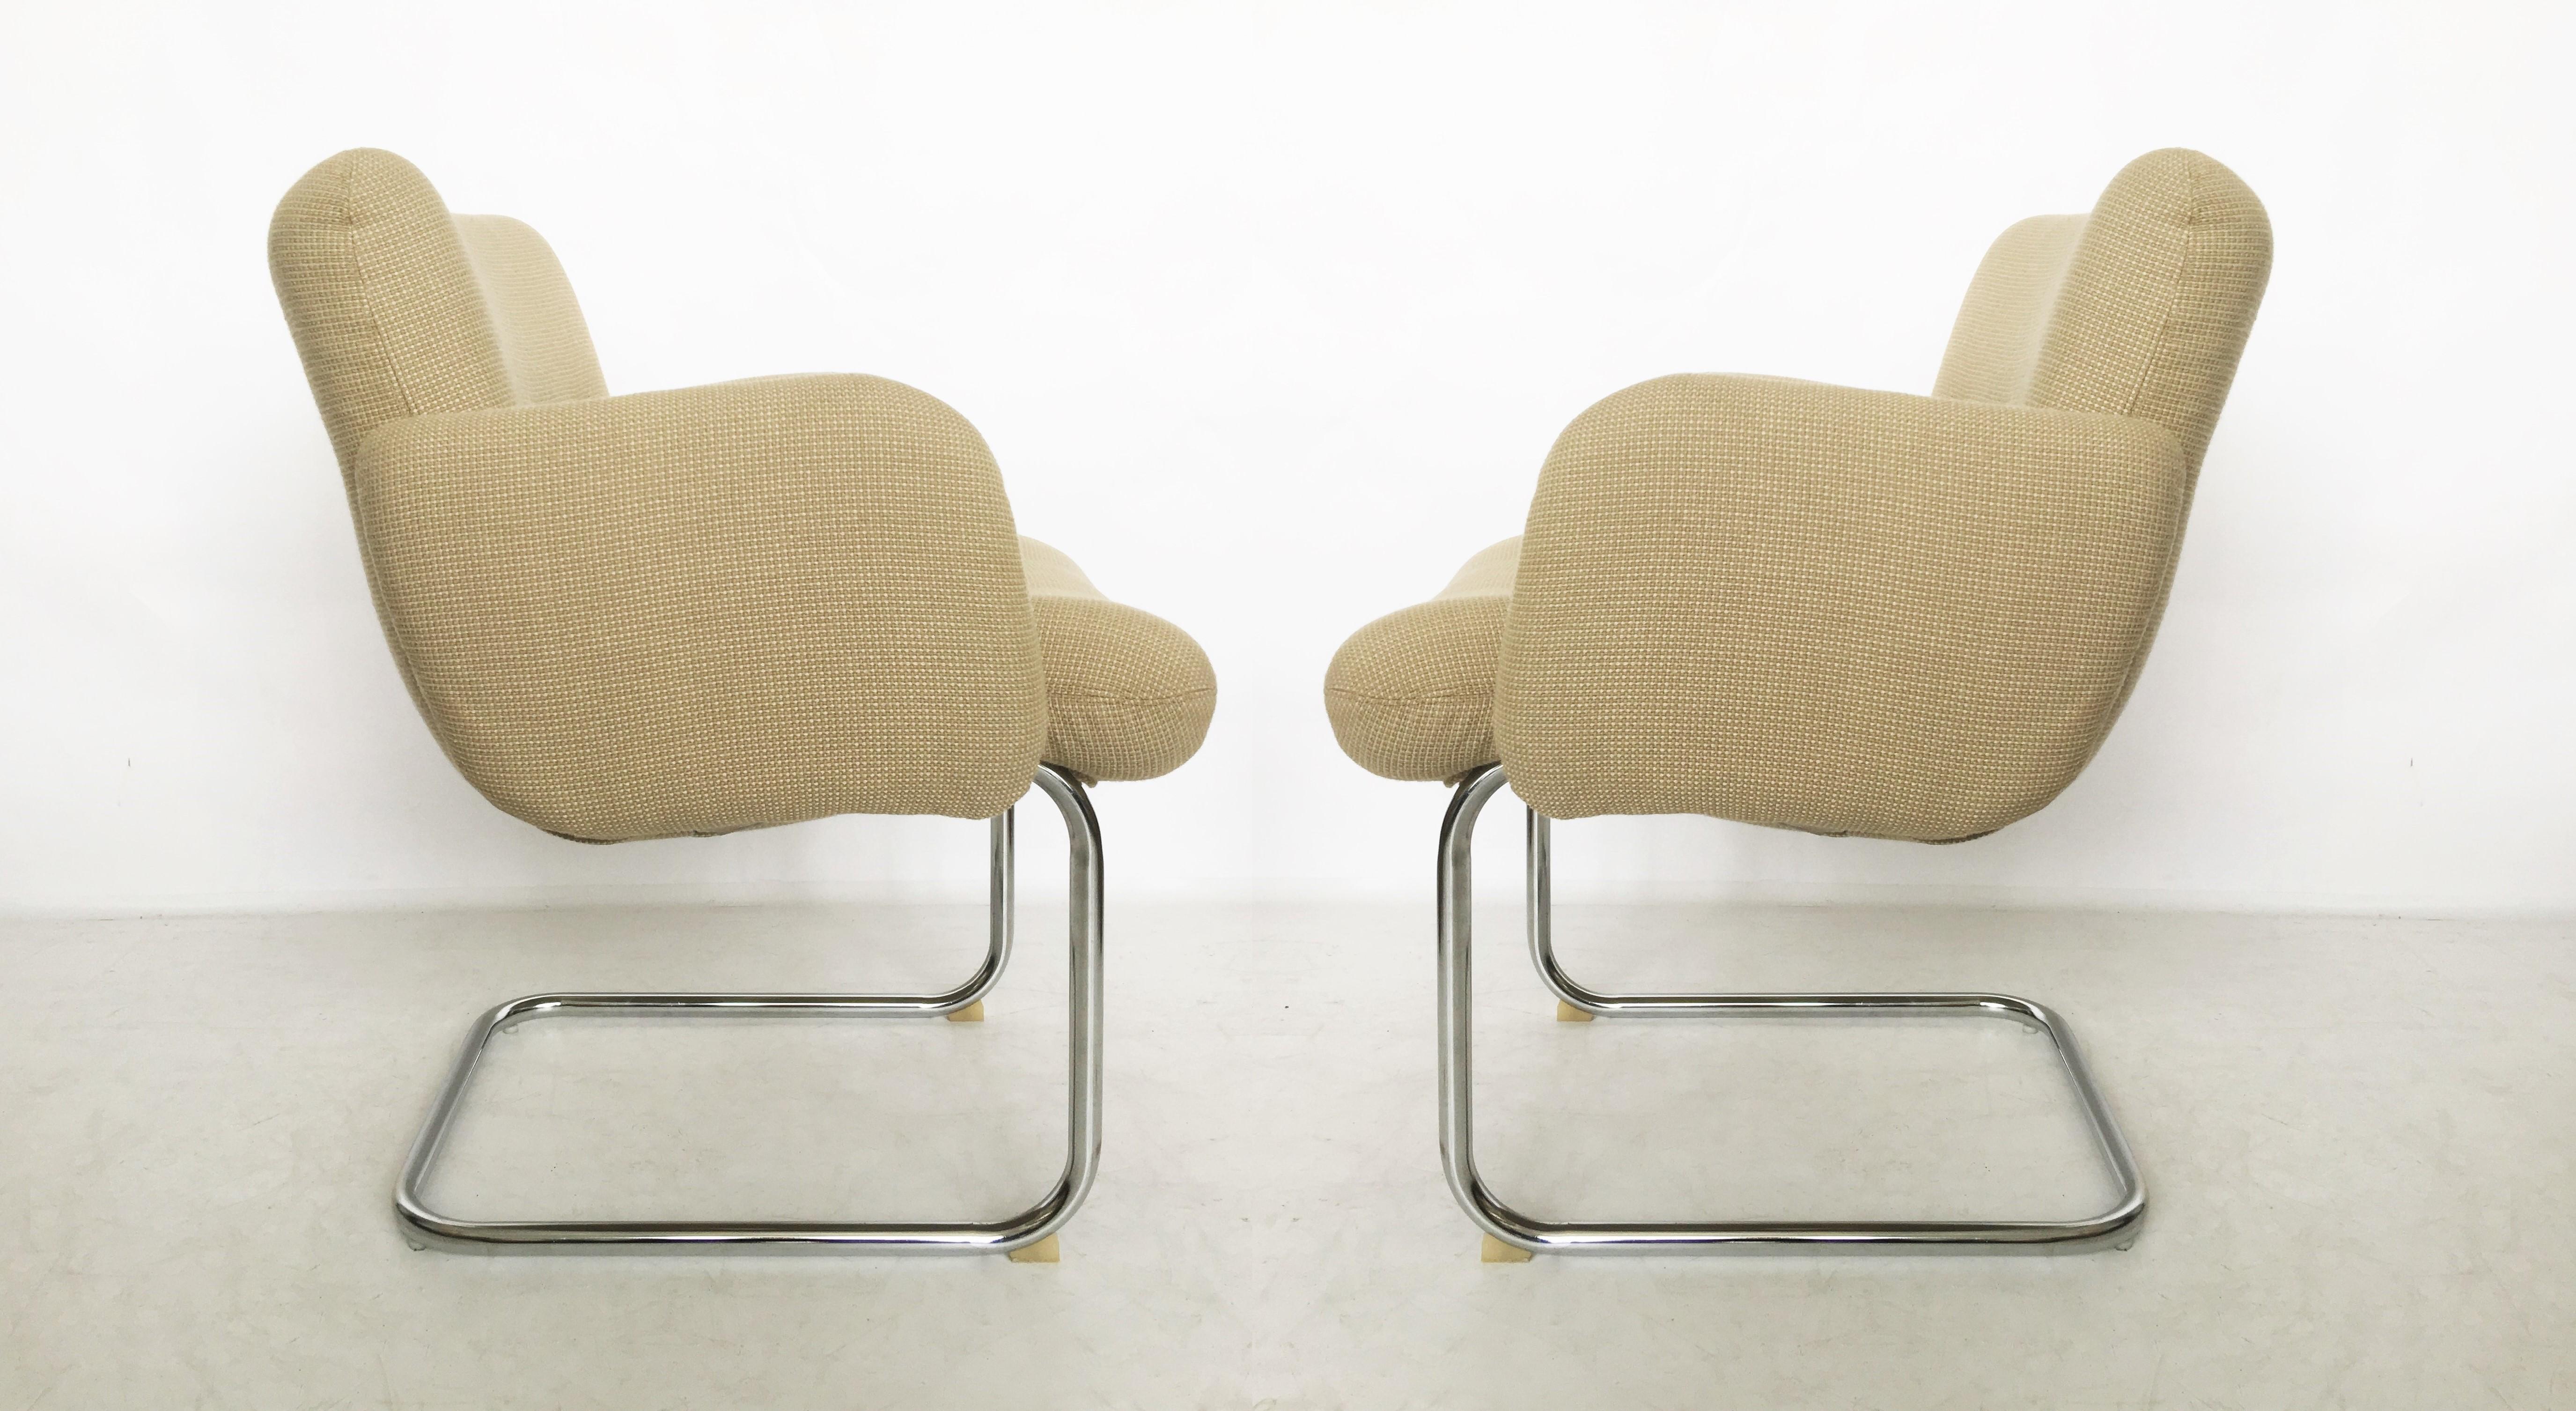 Pair of Mid-Century Modern Harvey Probber Cantilevered Chairs In Good Condition For Sale In Dallas, TX